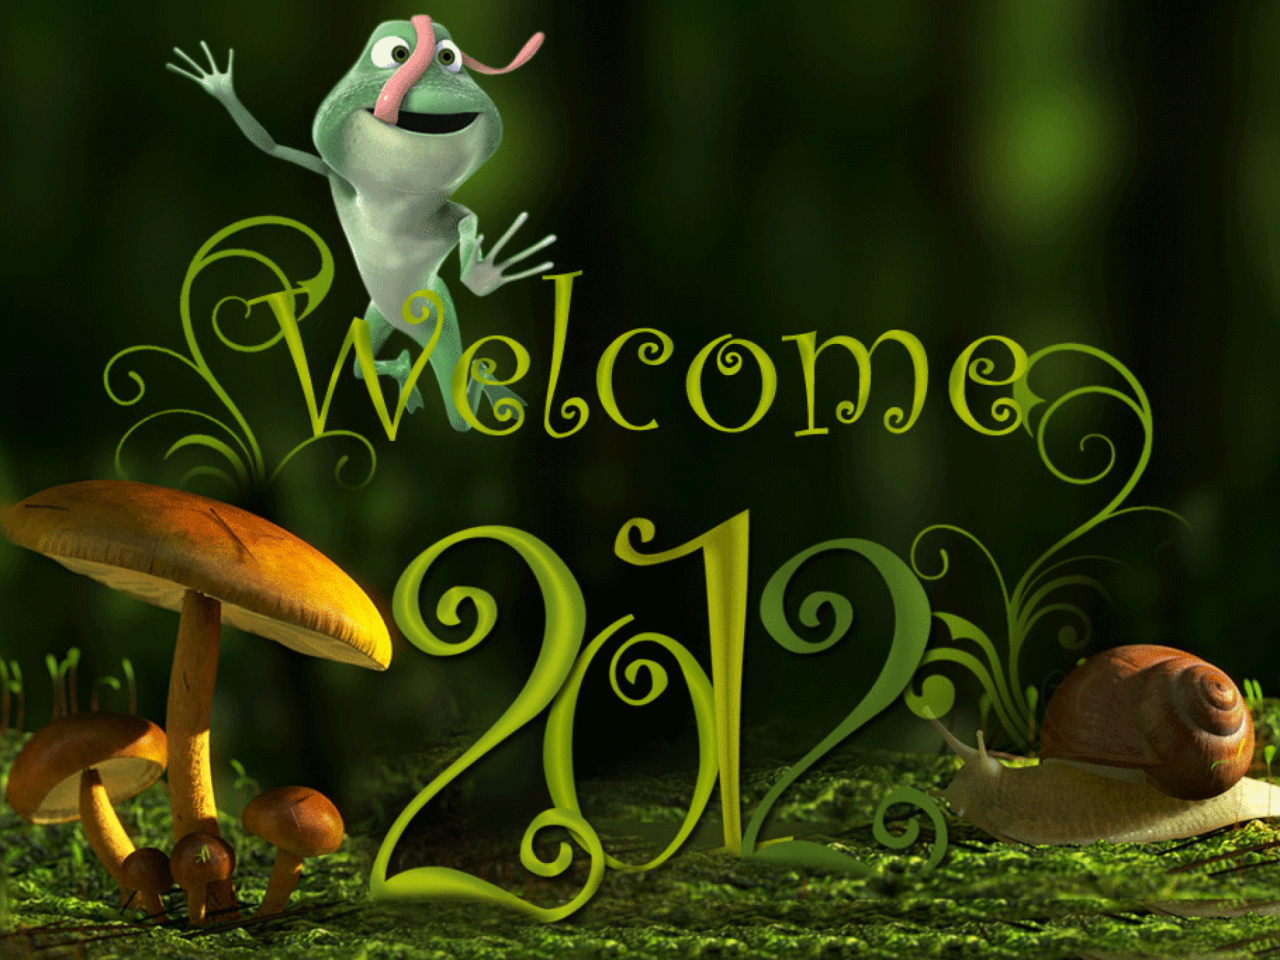 Welcome New Year 2012 wallpaper 1280x960